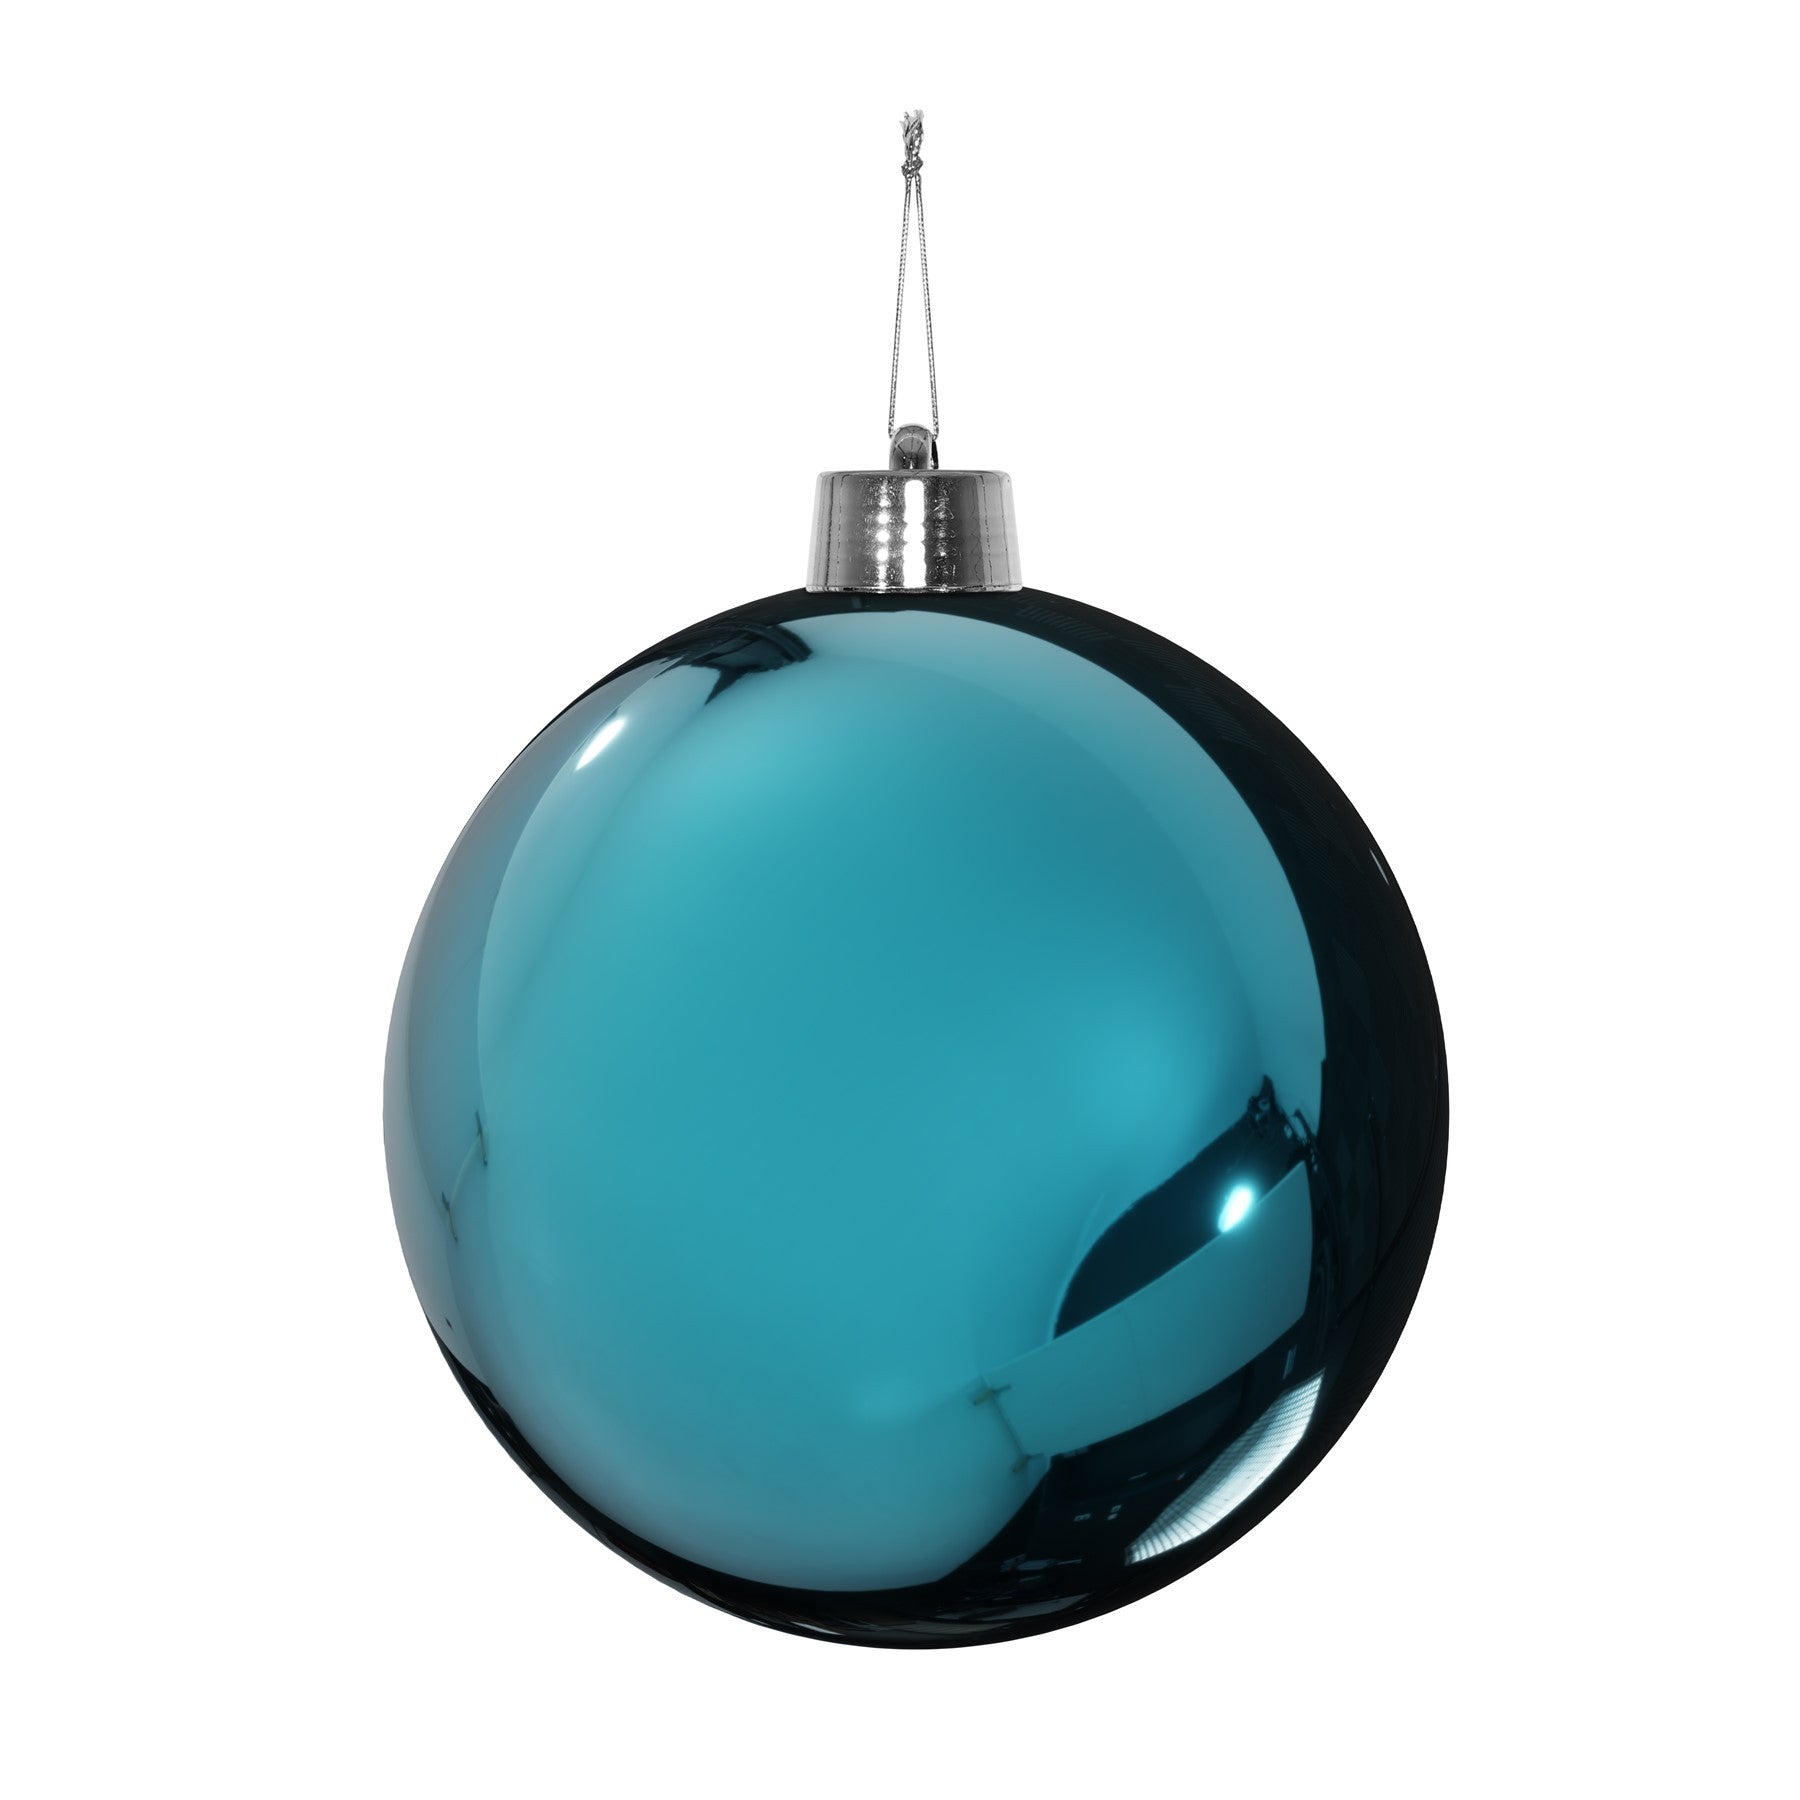 View Turquoise Shiny Shatterproof Bauble 25cm information